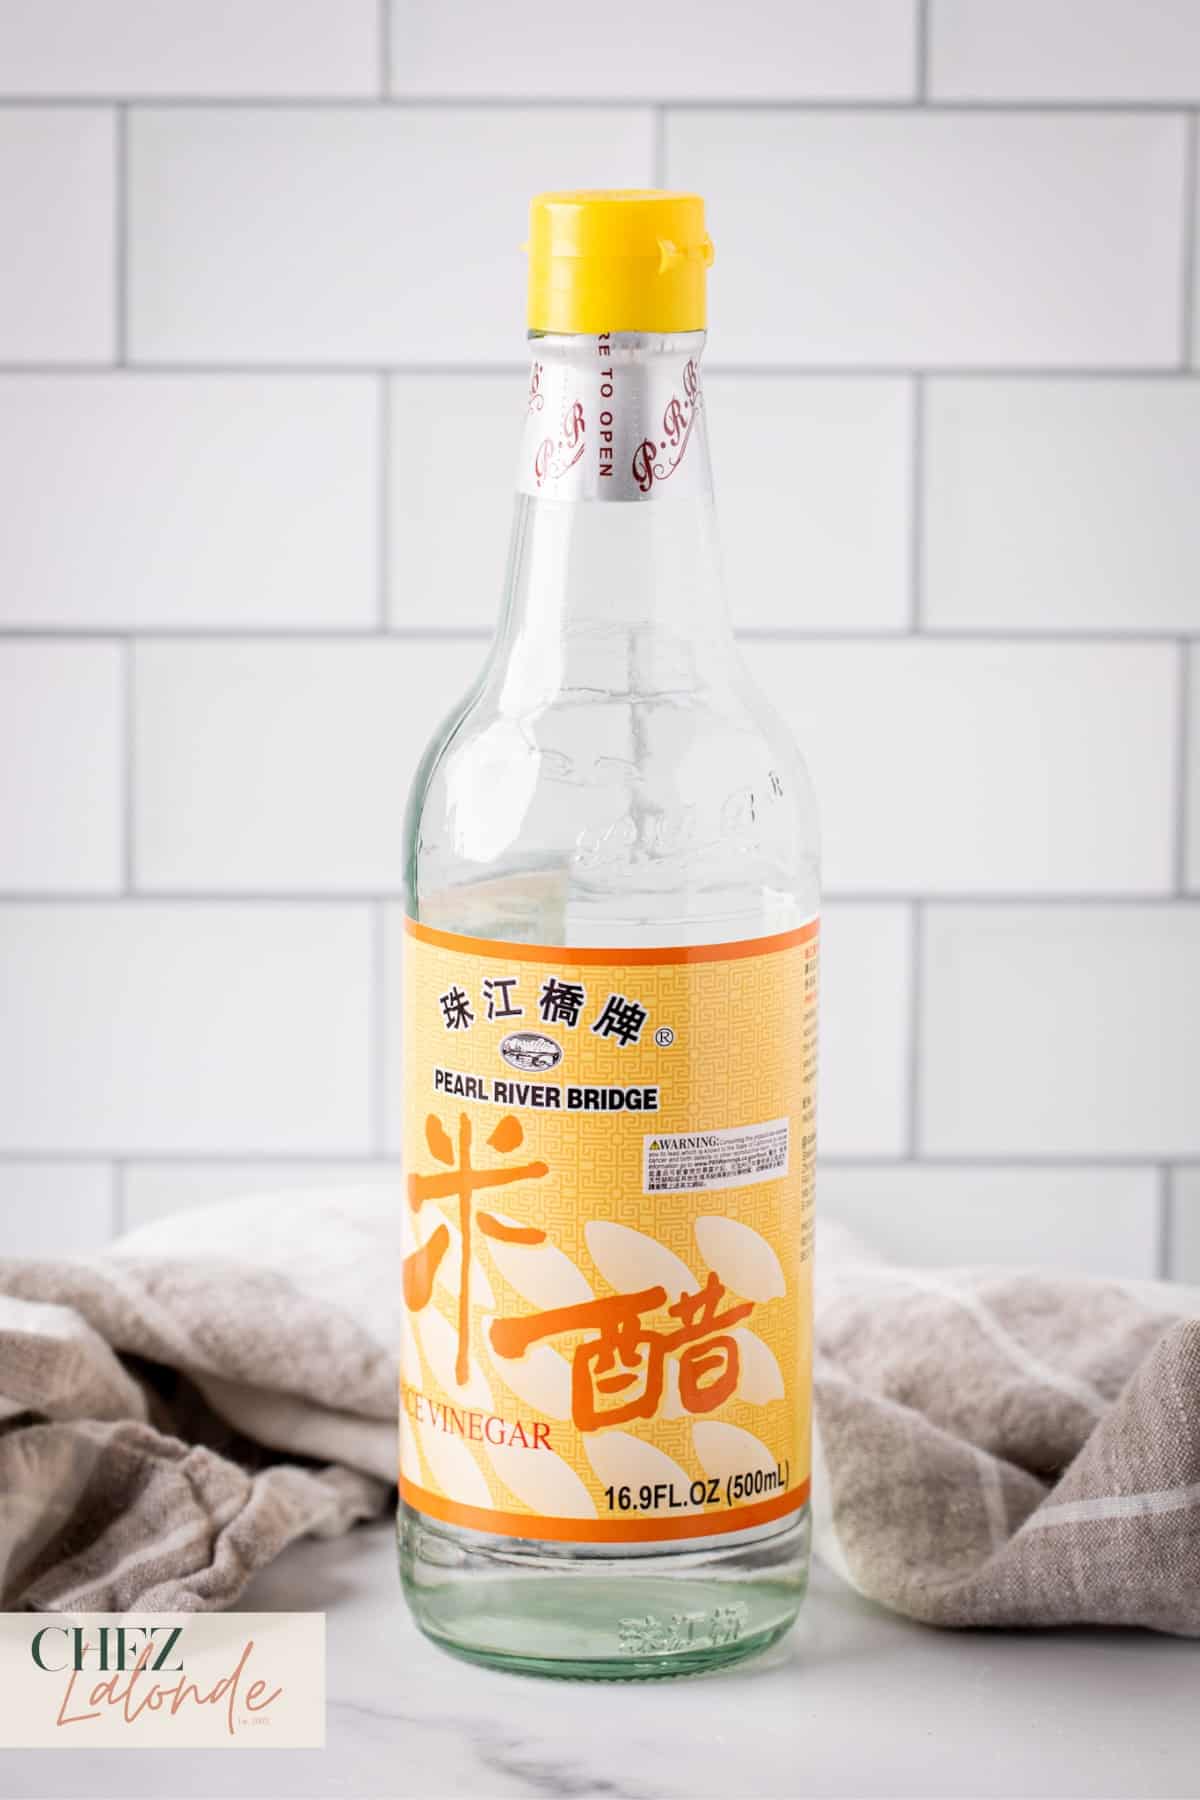 A bottle of Chinese rice vinegar.